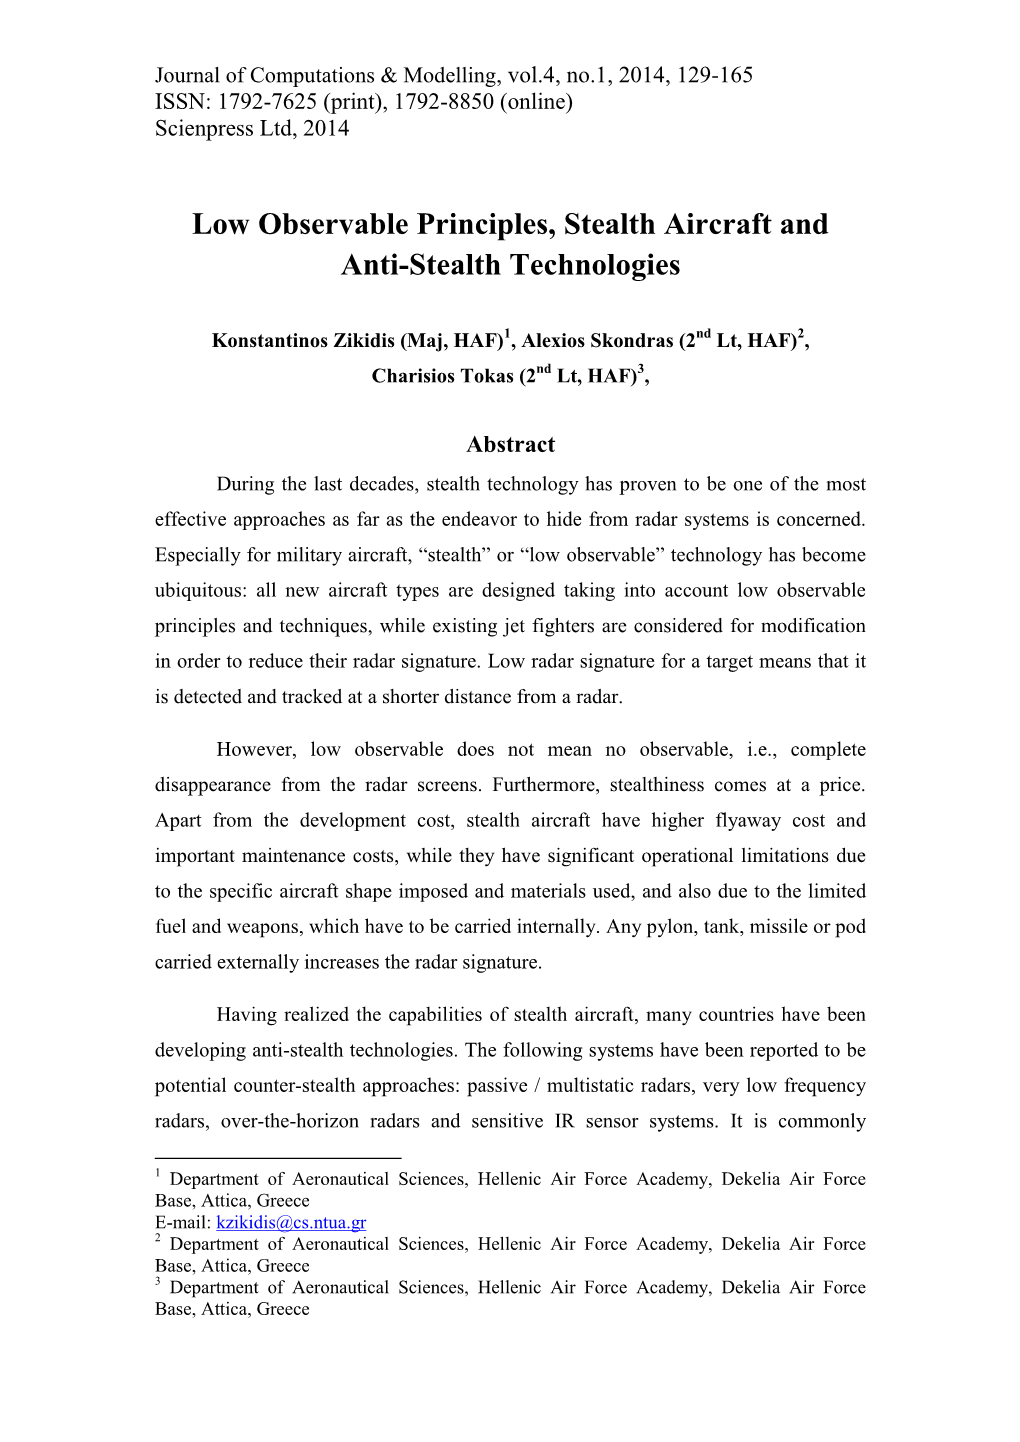 Low Observable Principles, Stealth Aircraft and Anti-Stealth Technologies